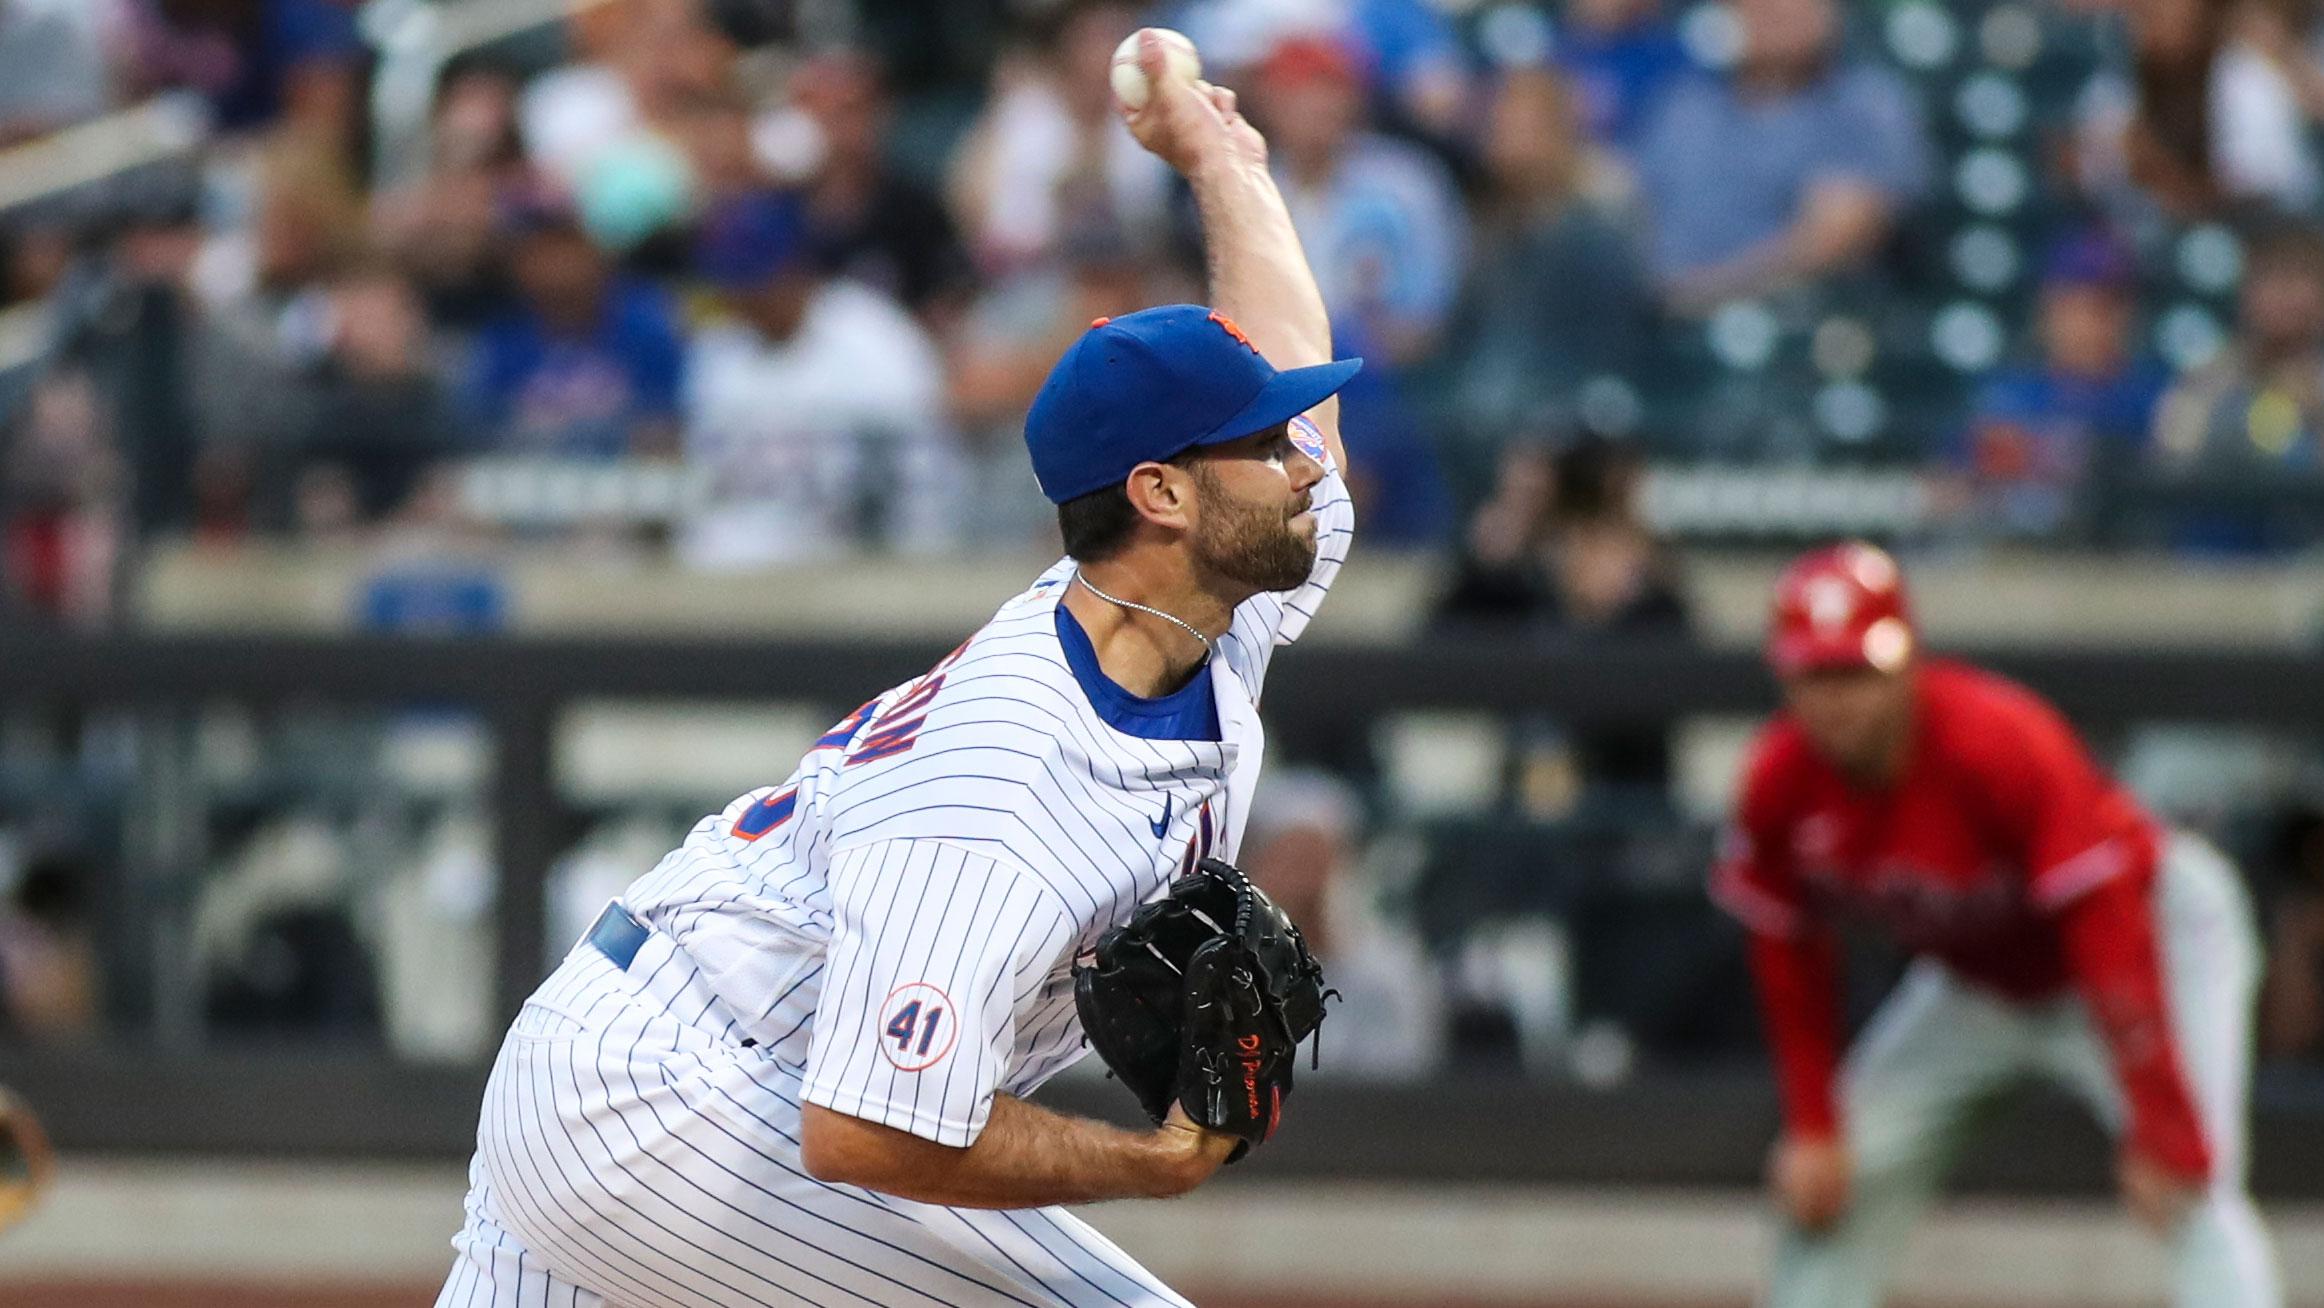 Jun 25, 2021; New York City, New York, USA; New York Mets pitcher Dave Peterson (23) pitches in the first inning against the Philadelphia Phillies at Citi Field. / Wendell Cruz-USA TODAY Sports